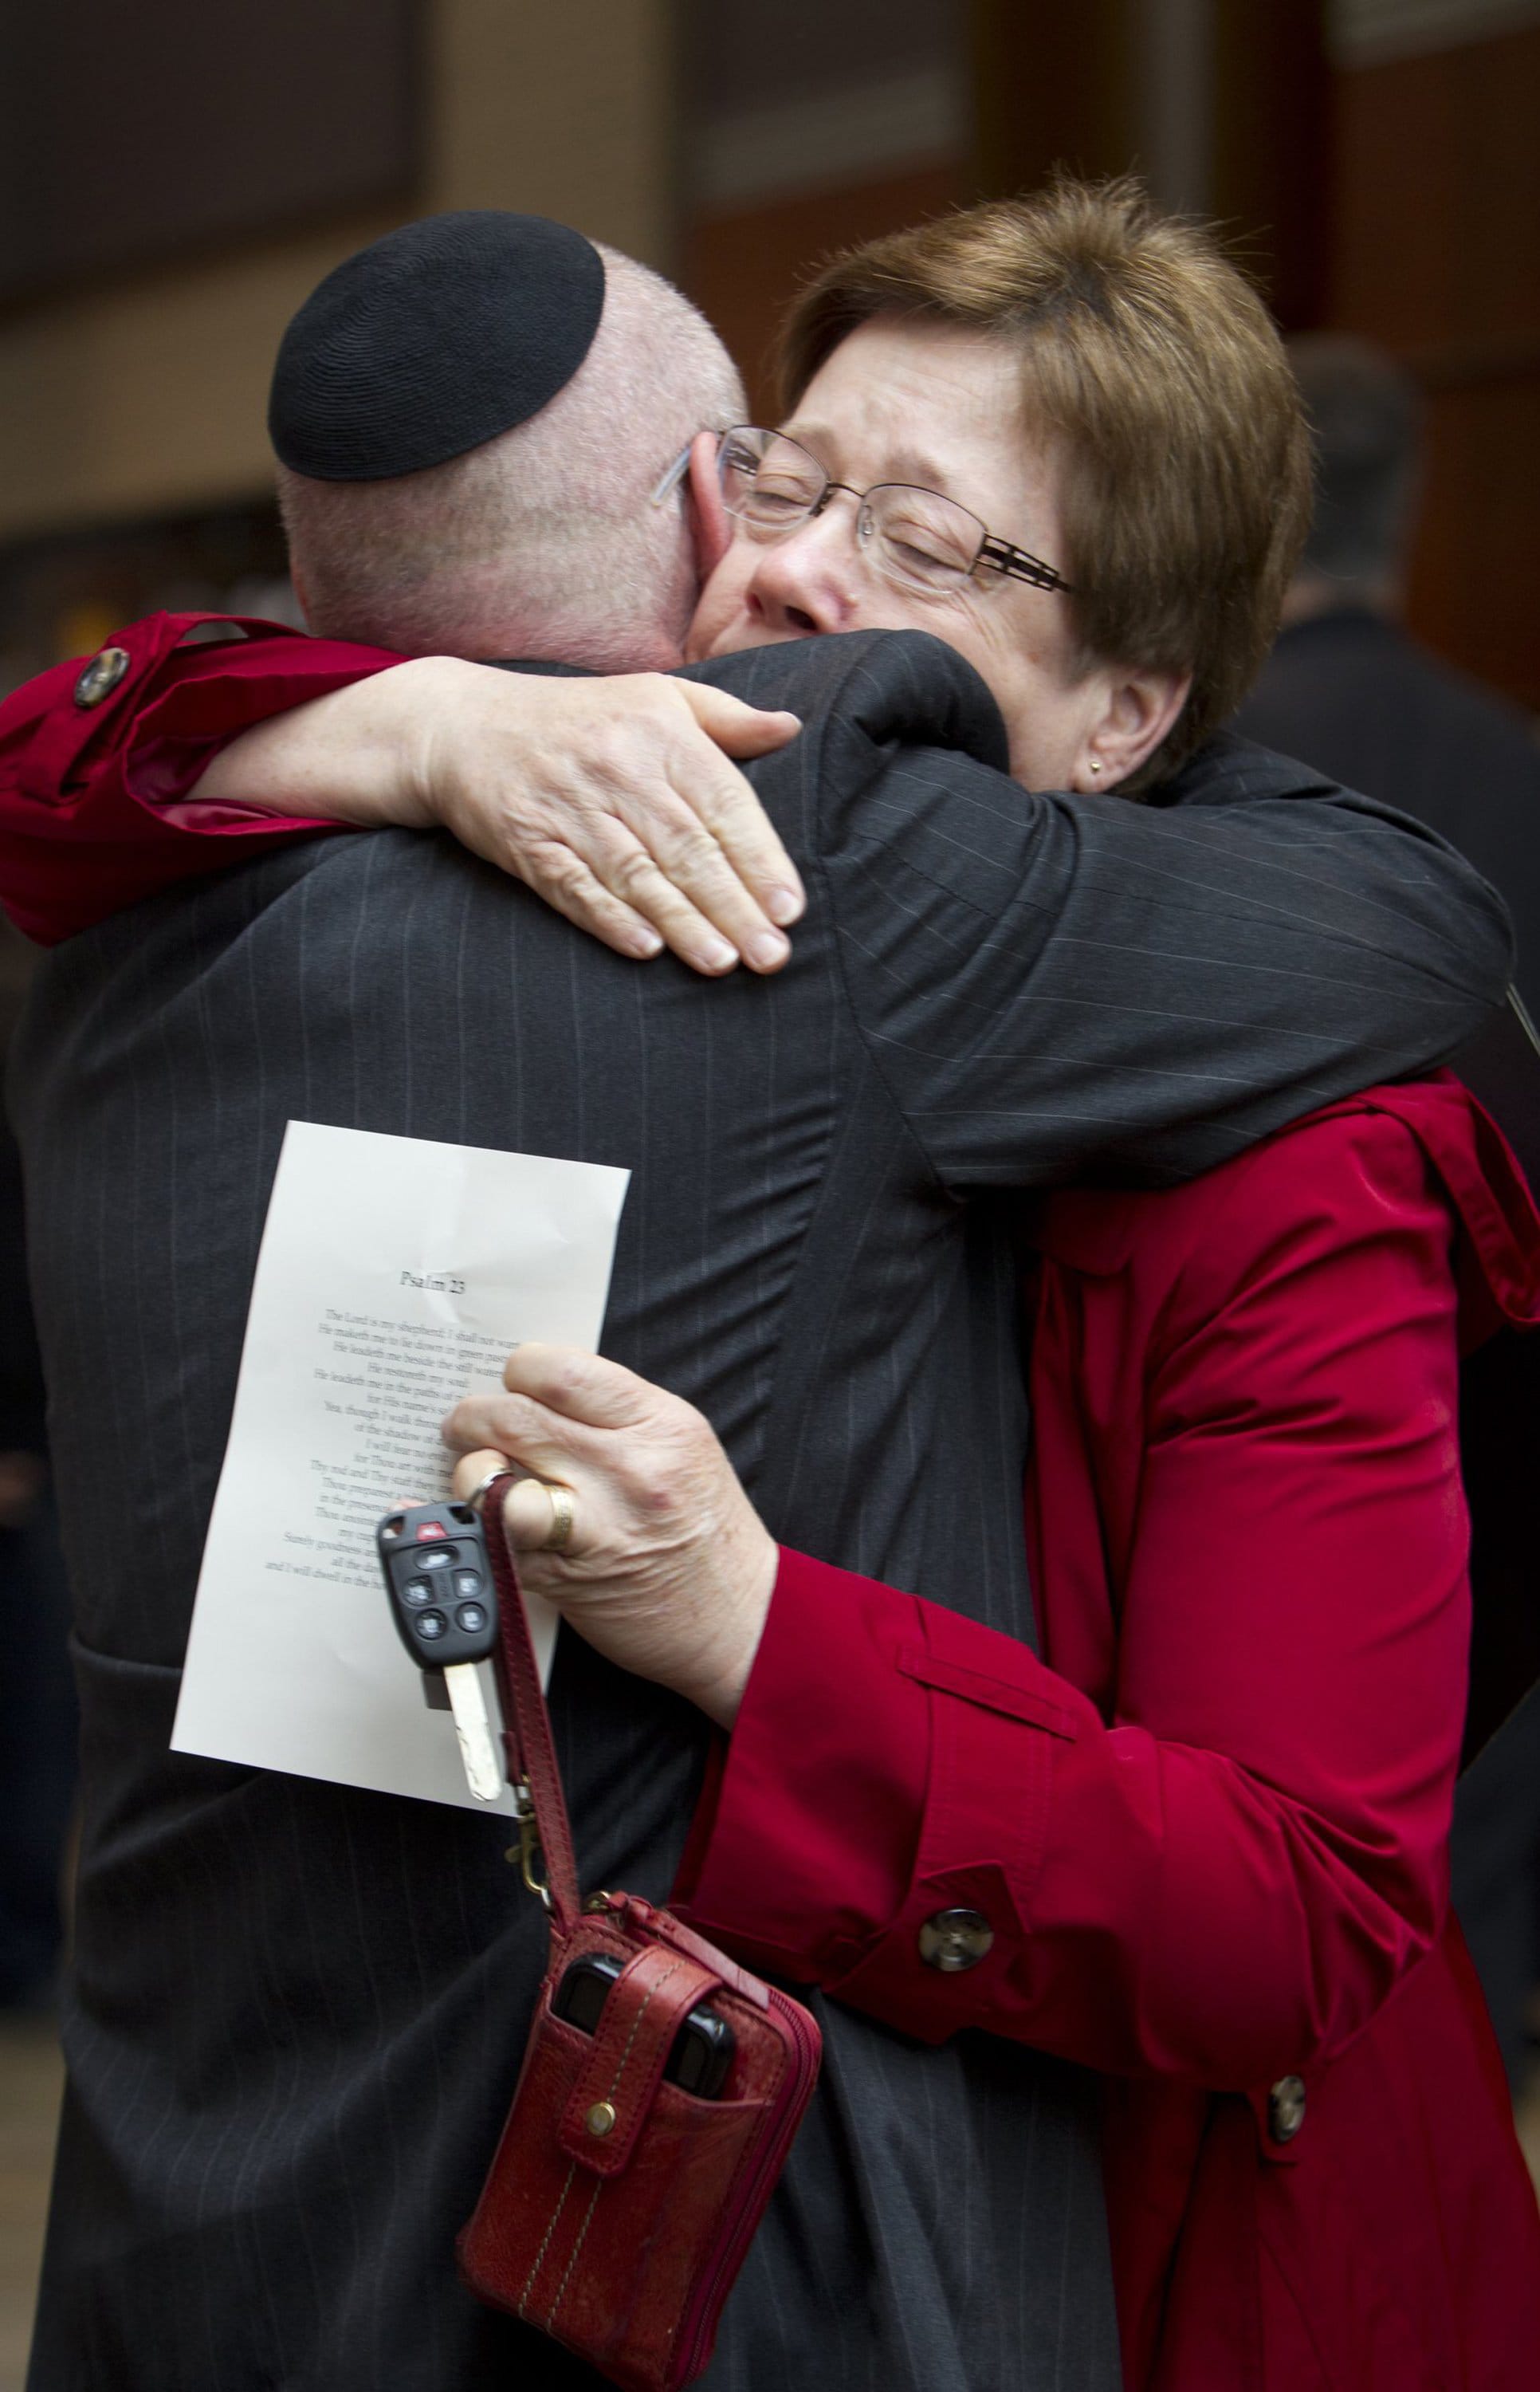 Rabbi Arthur Nemitoff of The Temple, Congregation B'nai Jehudah, left, and Sue Thompson of Church of the Resurrection hug Thursday at a service in Overland Park, Kan., for victims of Sunday's shooting.